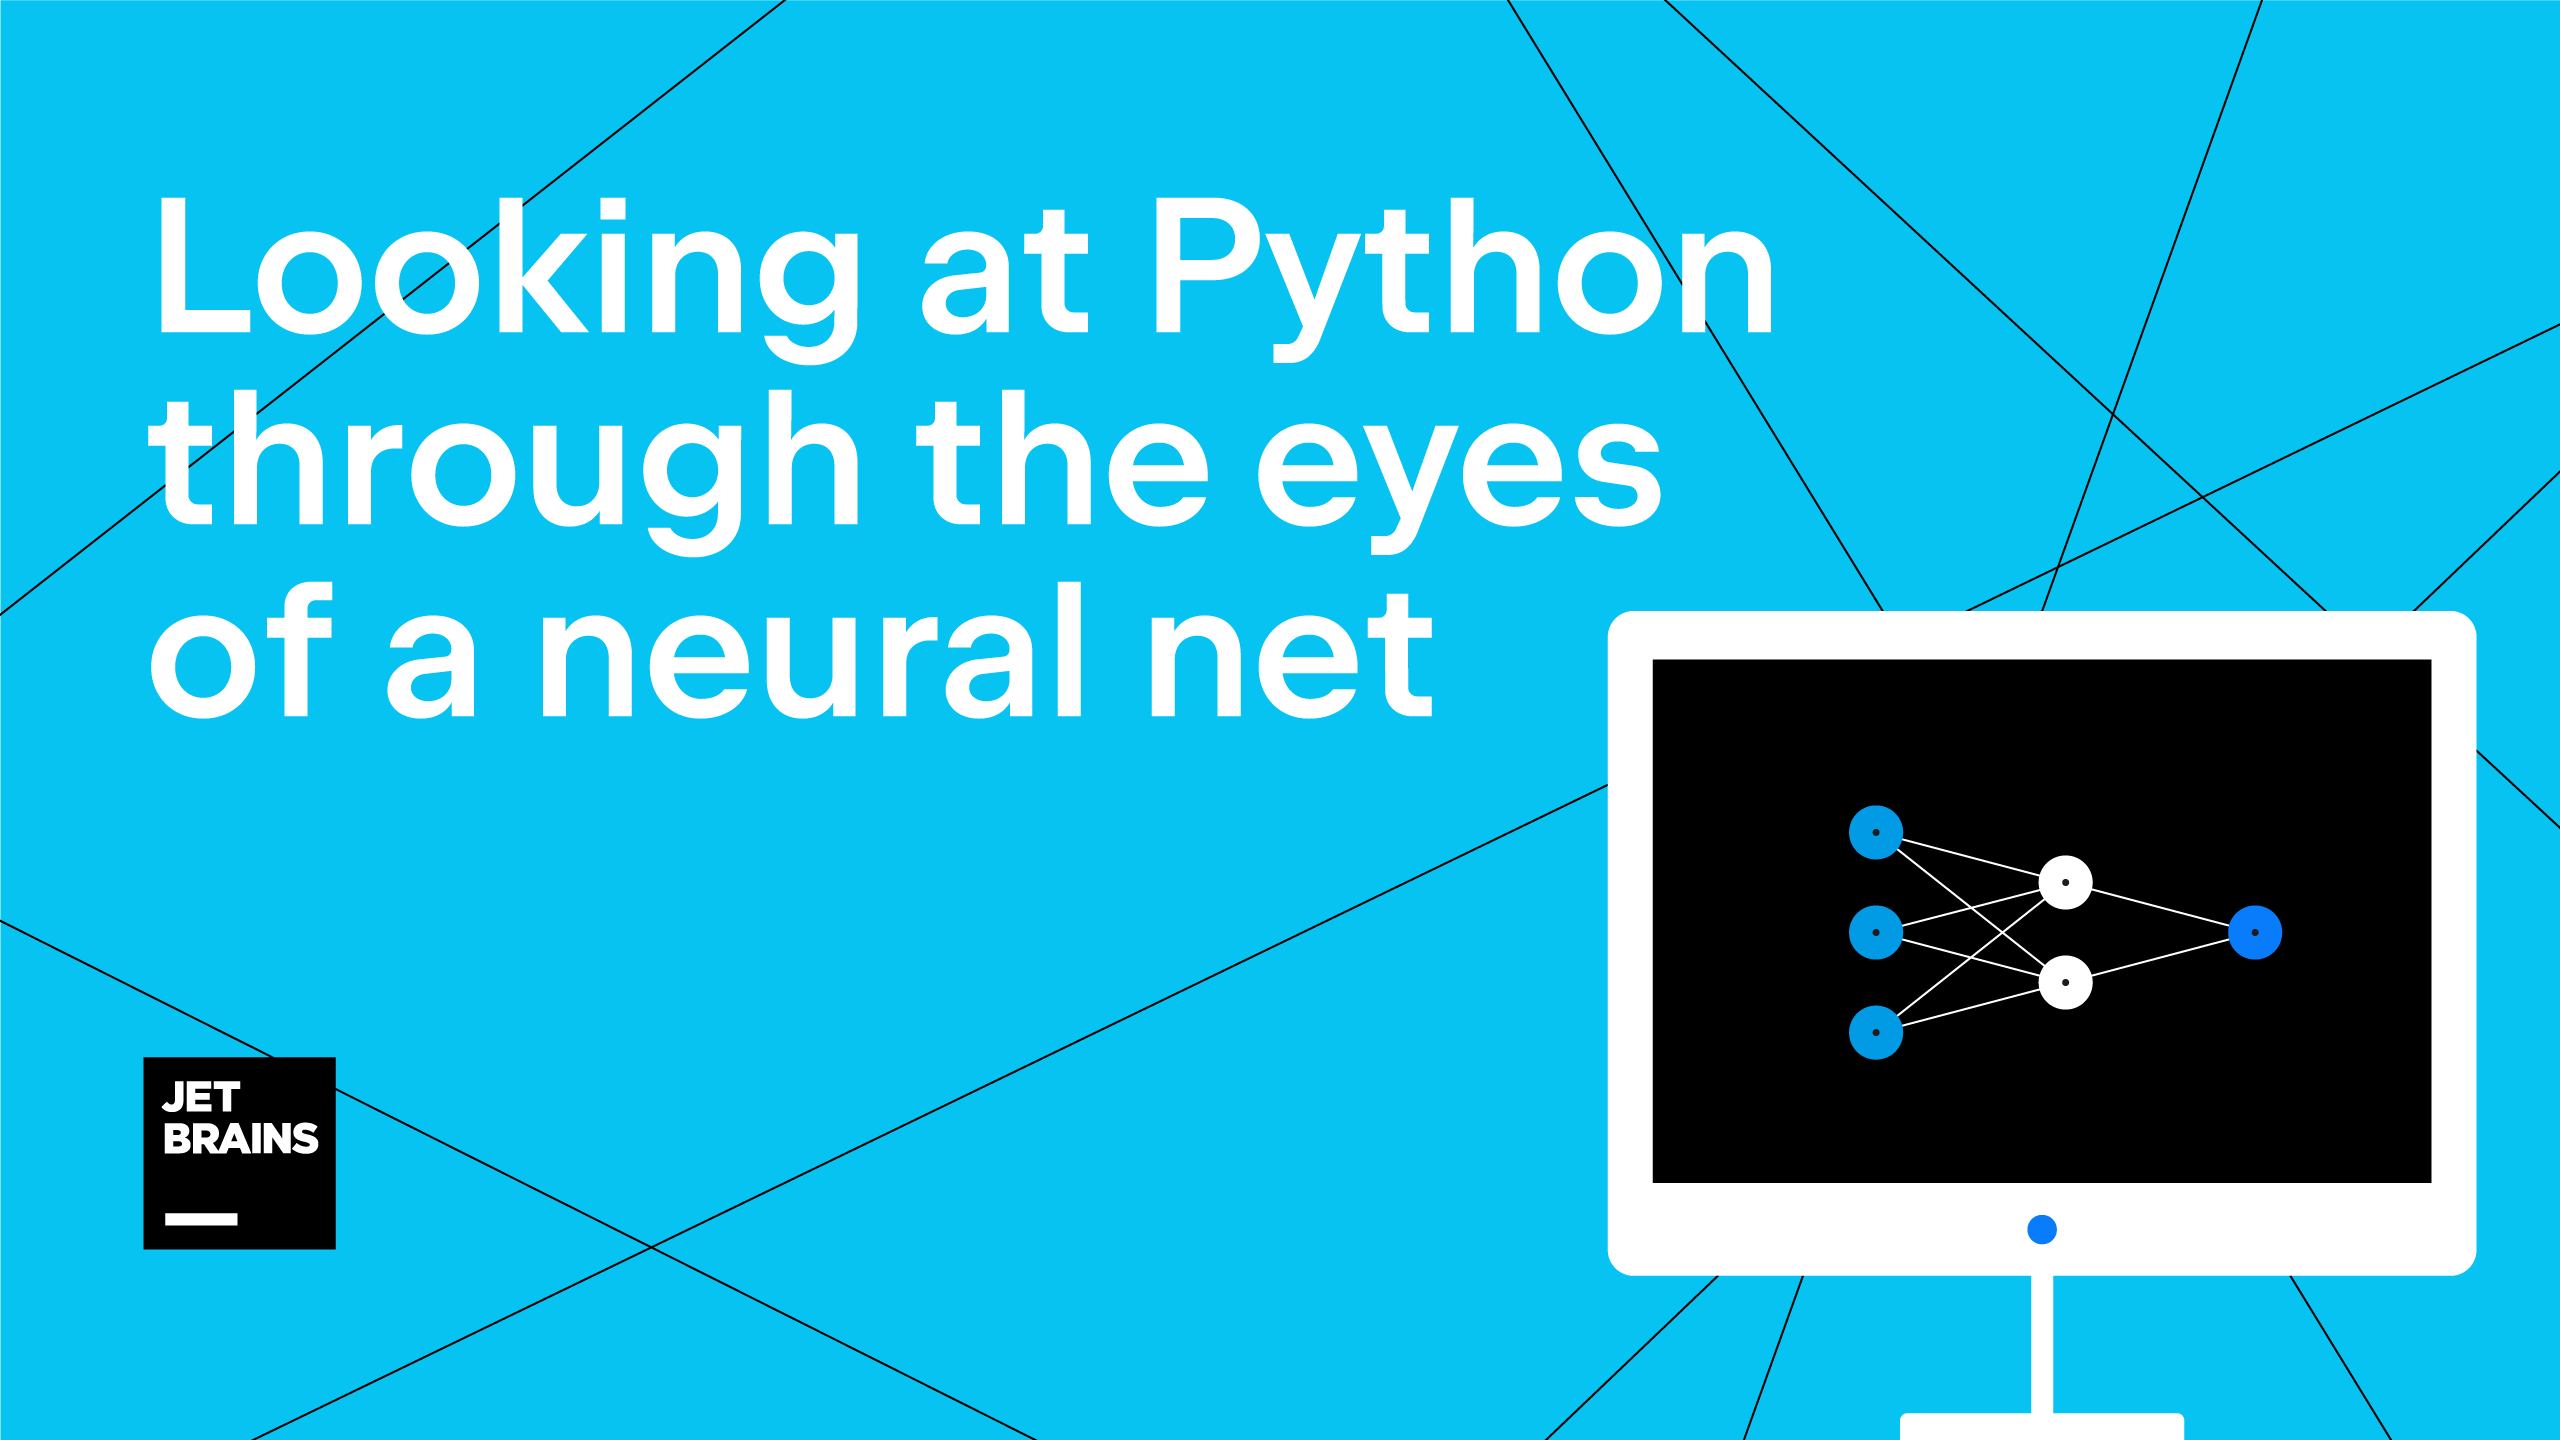 This is a simplified image of a computer display.  It also includes the following text: Looking at Python through the eyes of a neural net.